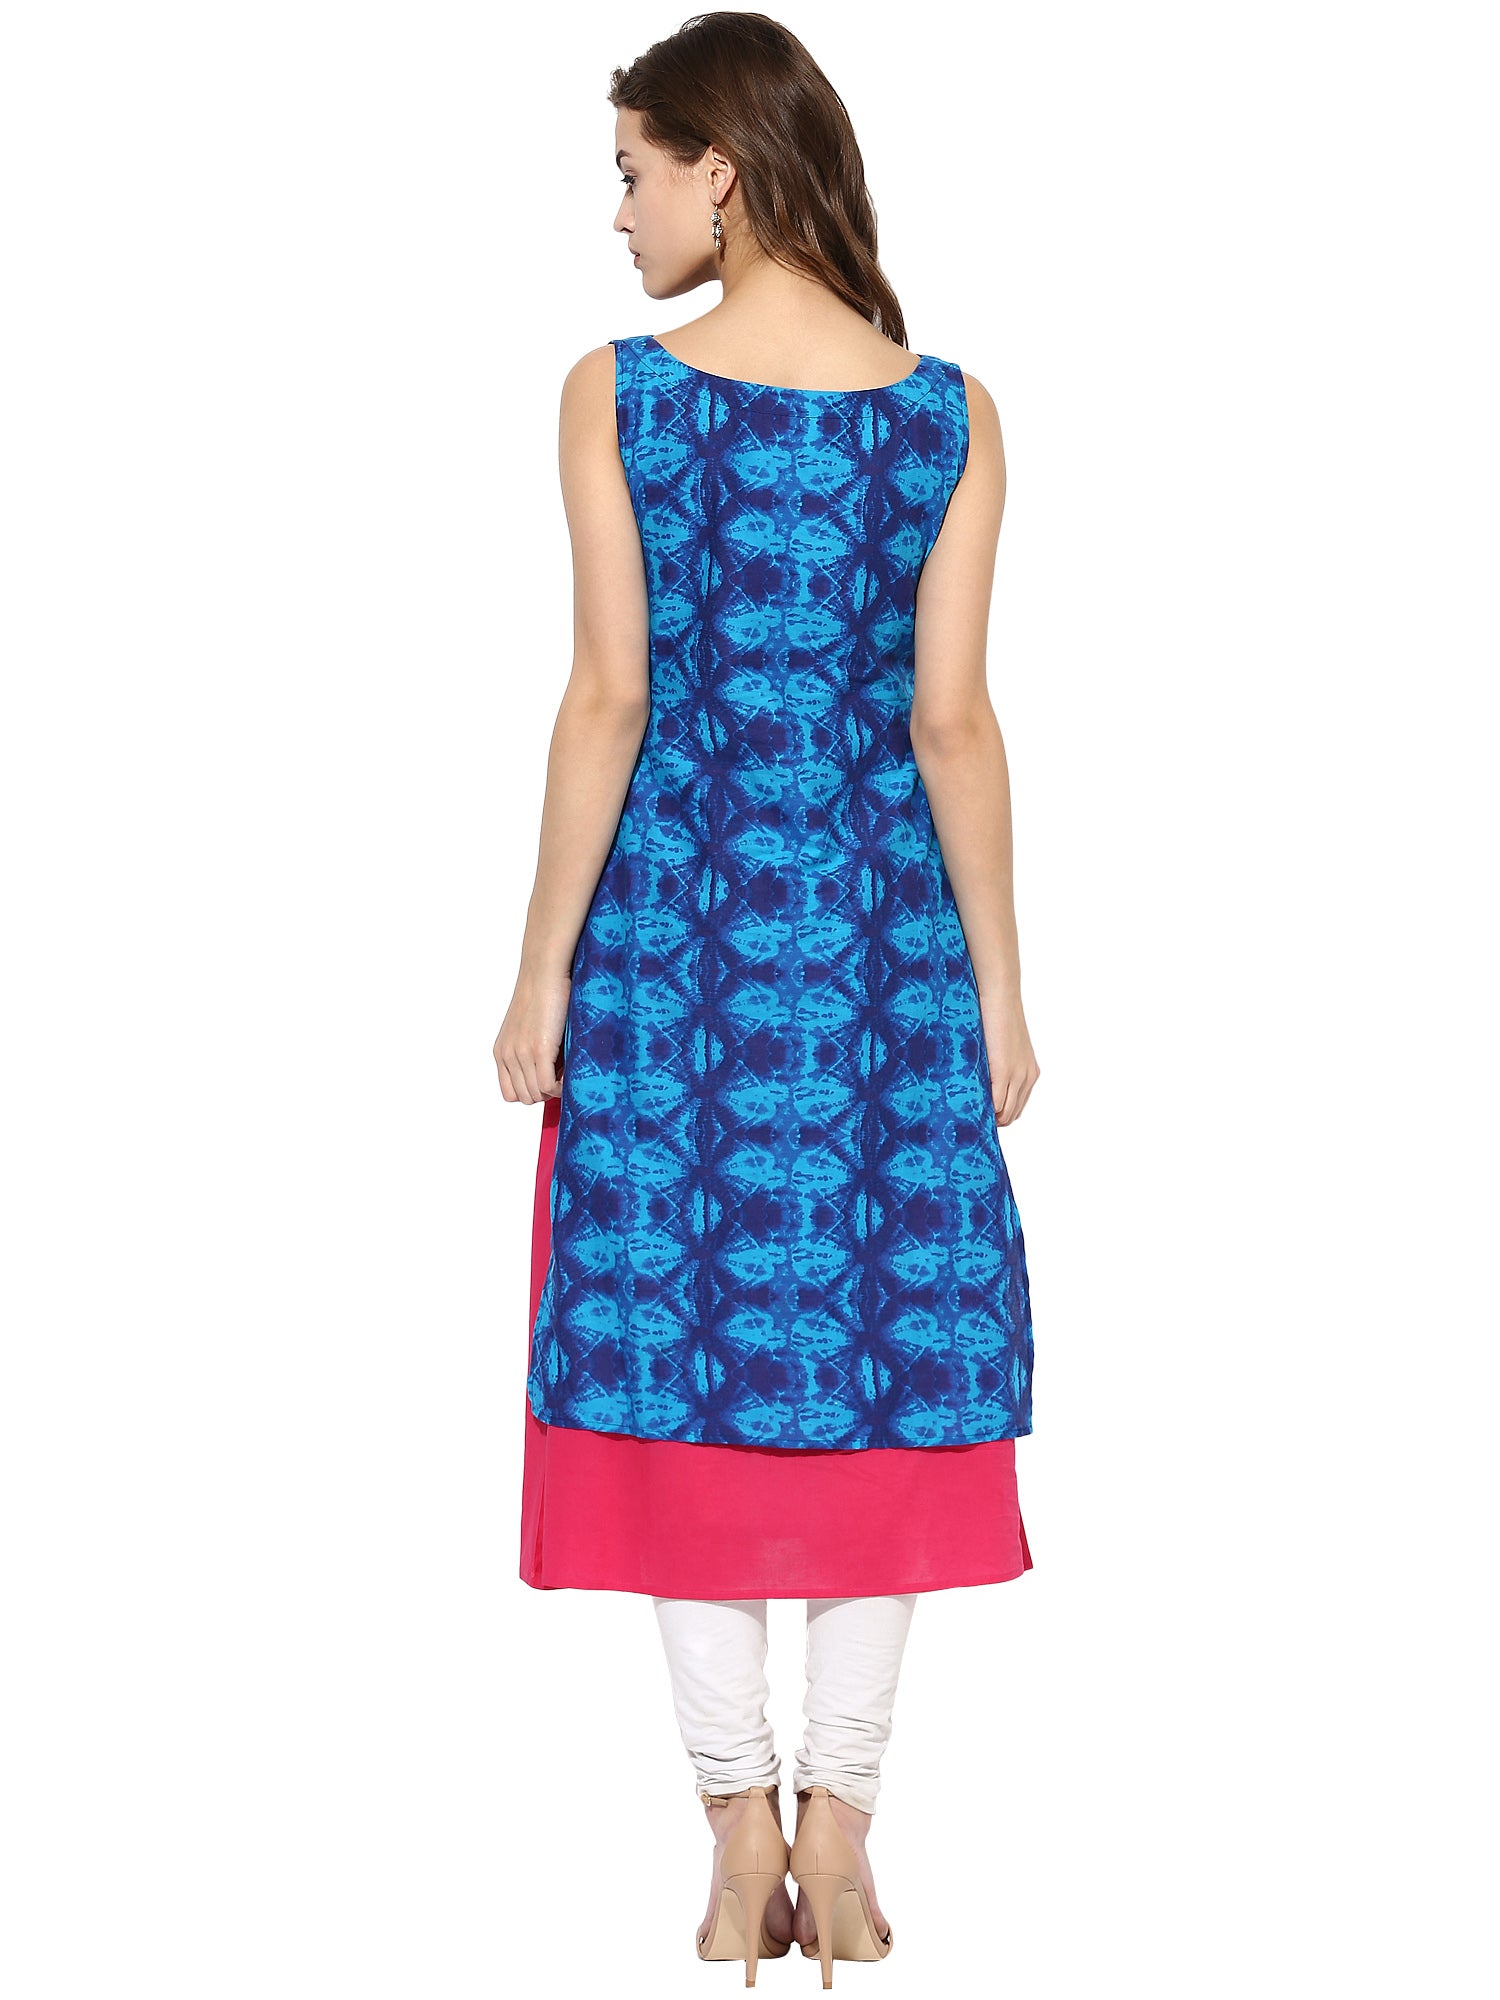 Women's Blue Color Sleeveless And Boat Neck Cotton Only Kurti - Ahalyaa